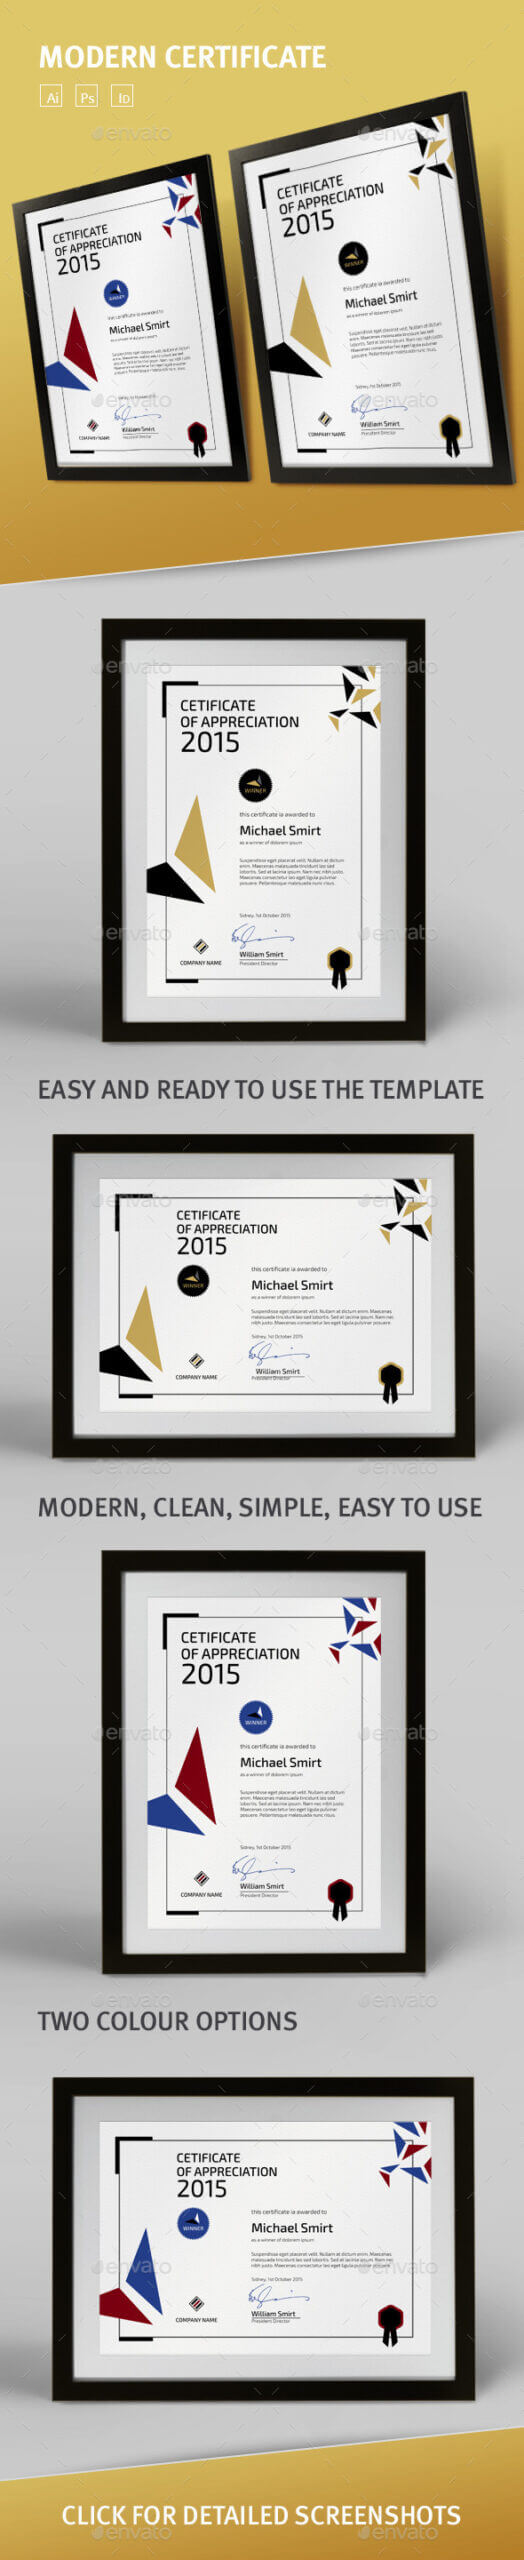 Certificate Graphics, Designs & Templates From Graphicriver Regarding Update Certificates That Use Certificate Templates